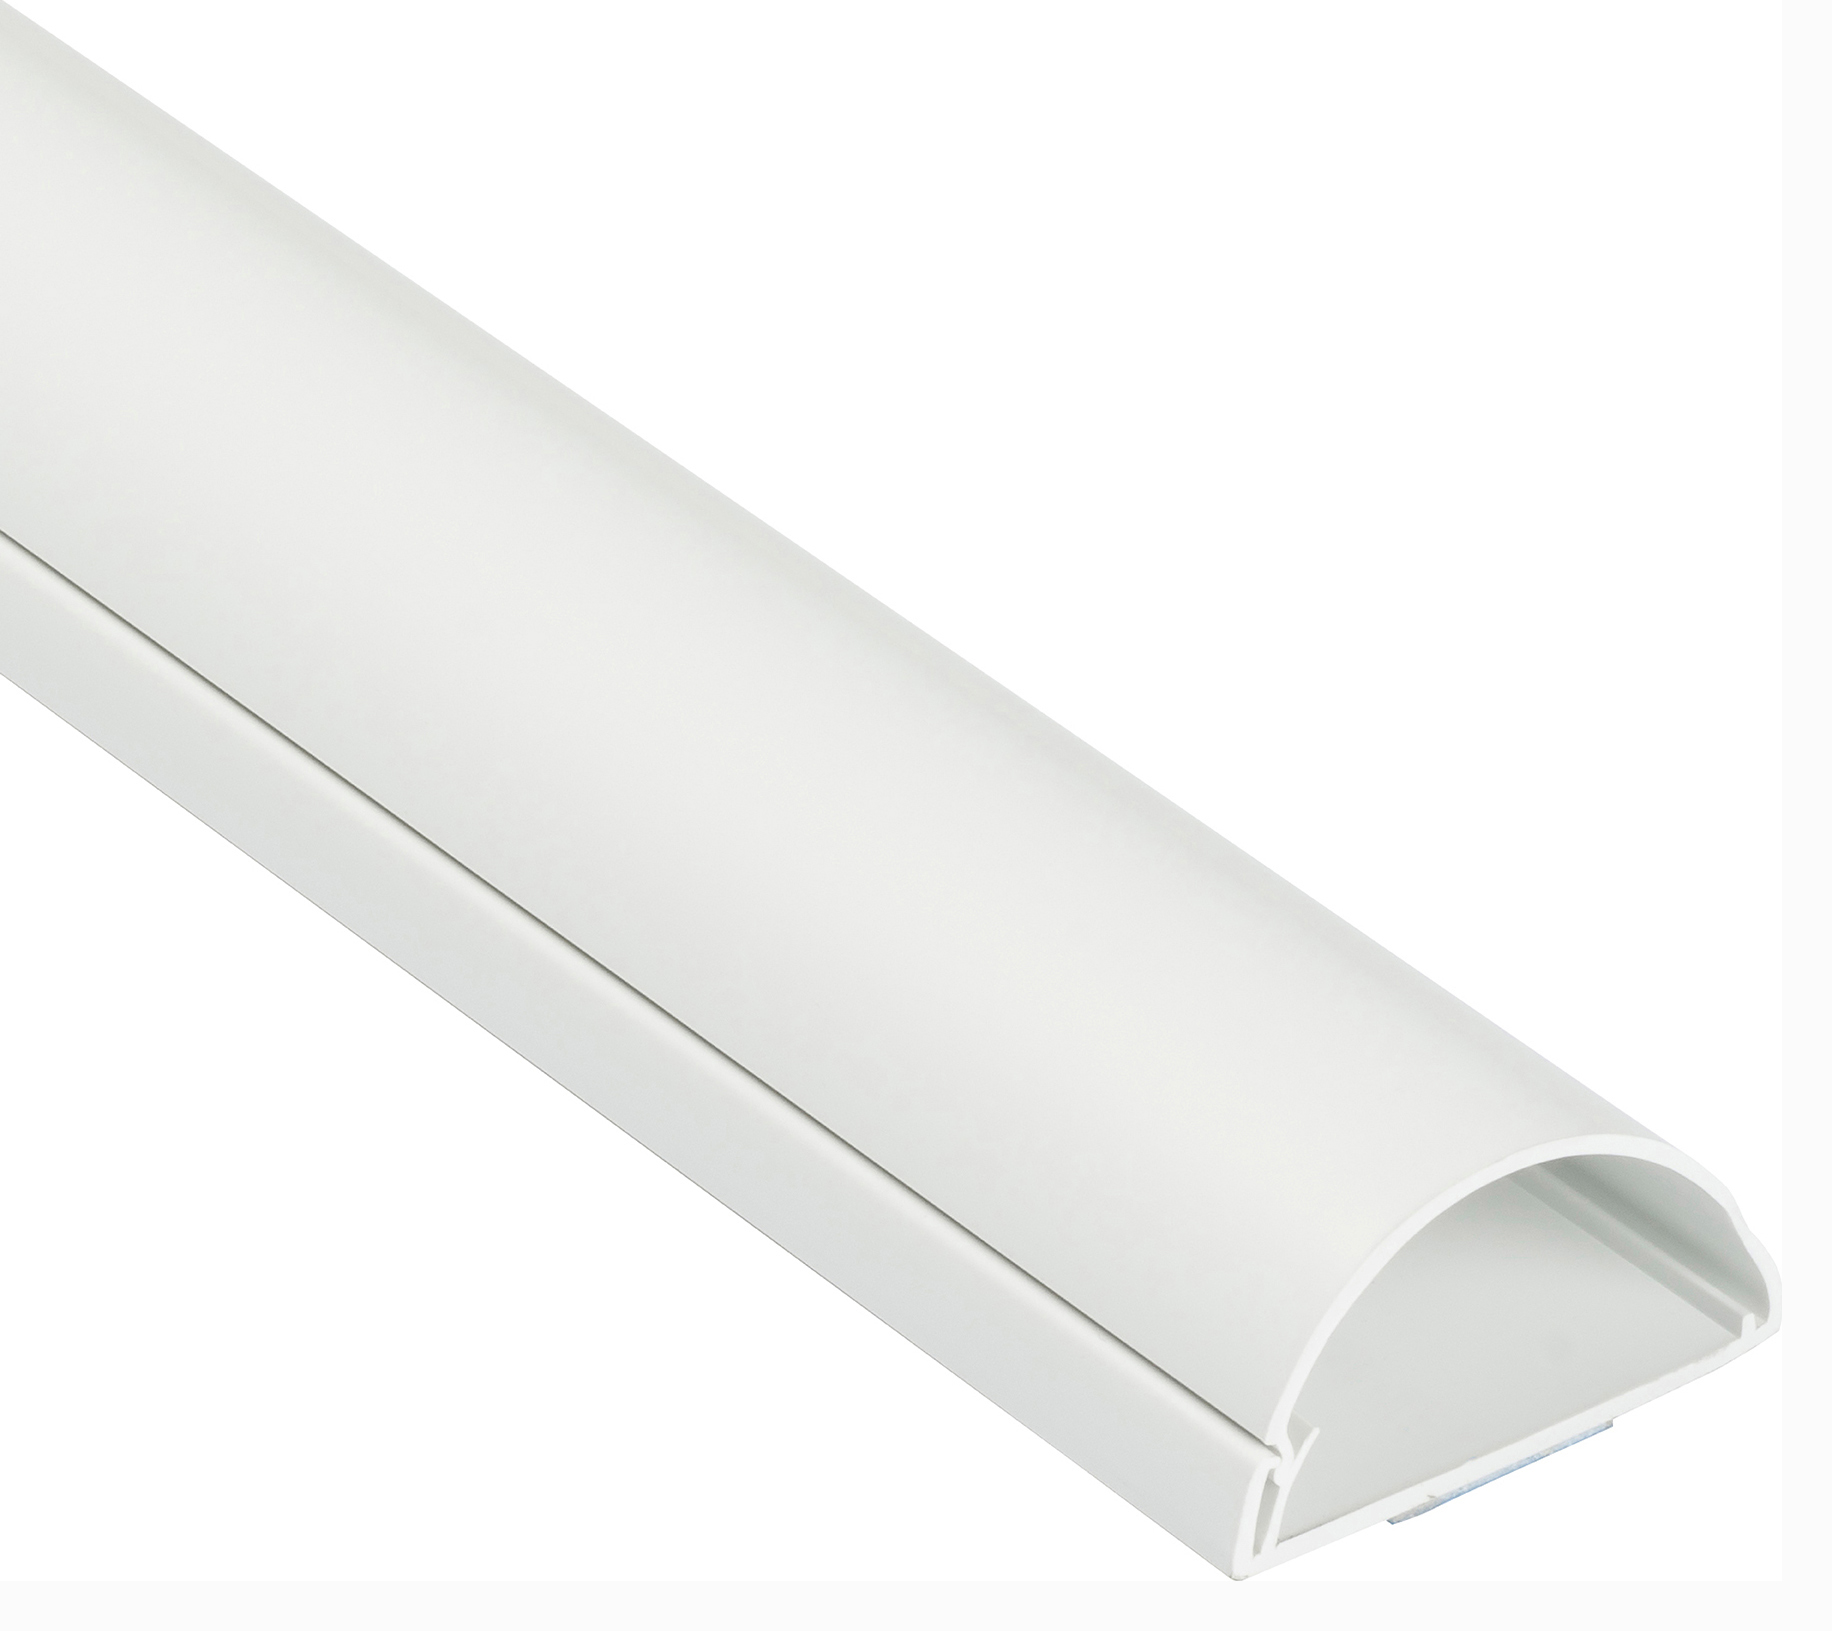 Image of D-Line Half Round Trunking - 50 x 25 x 2000mm